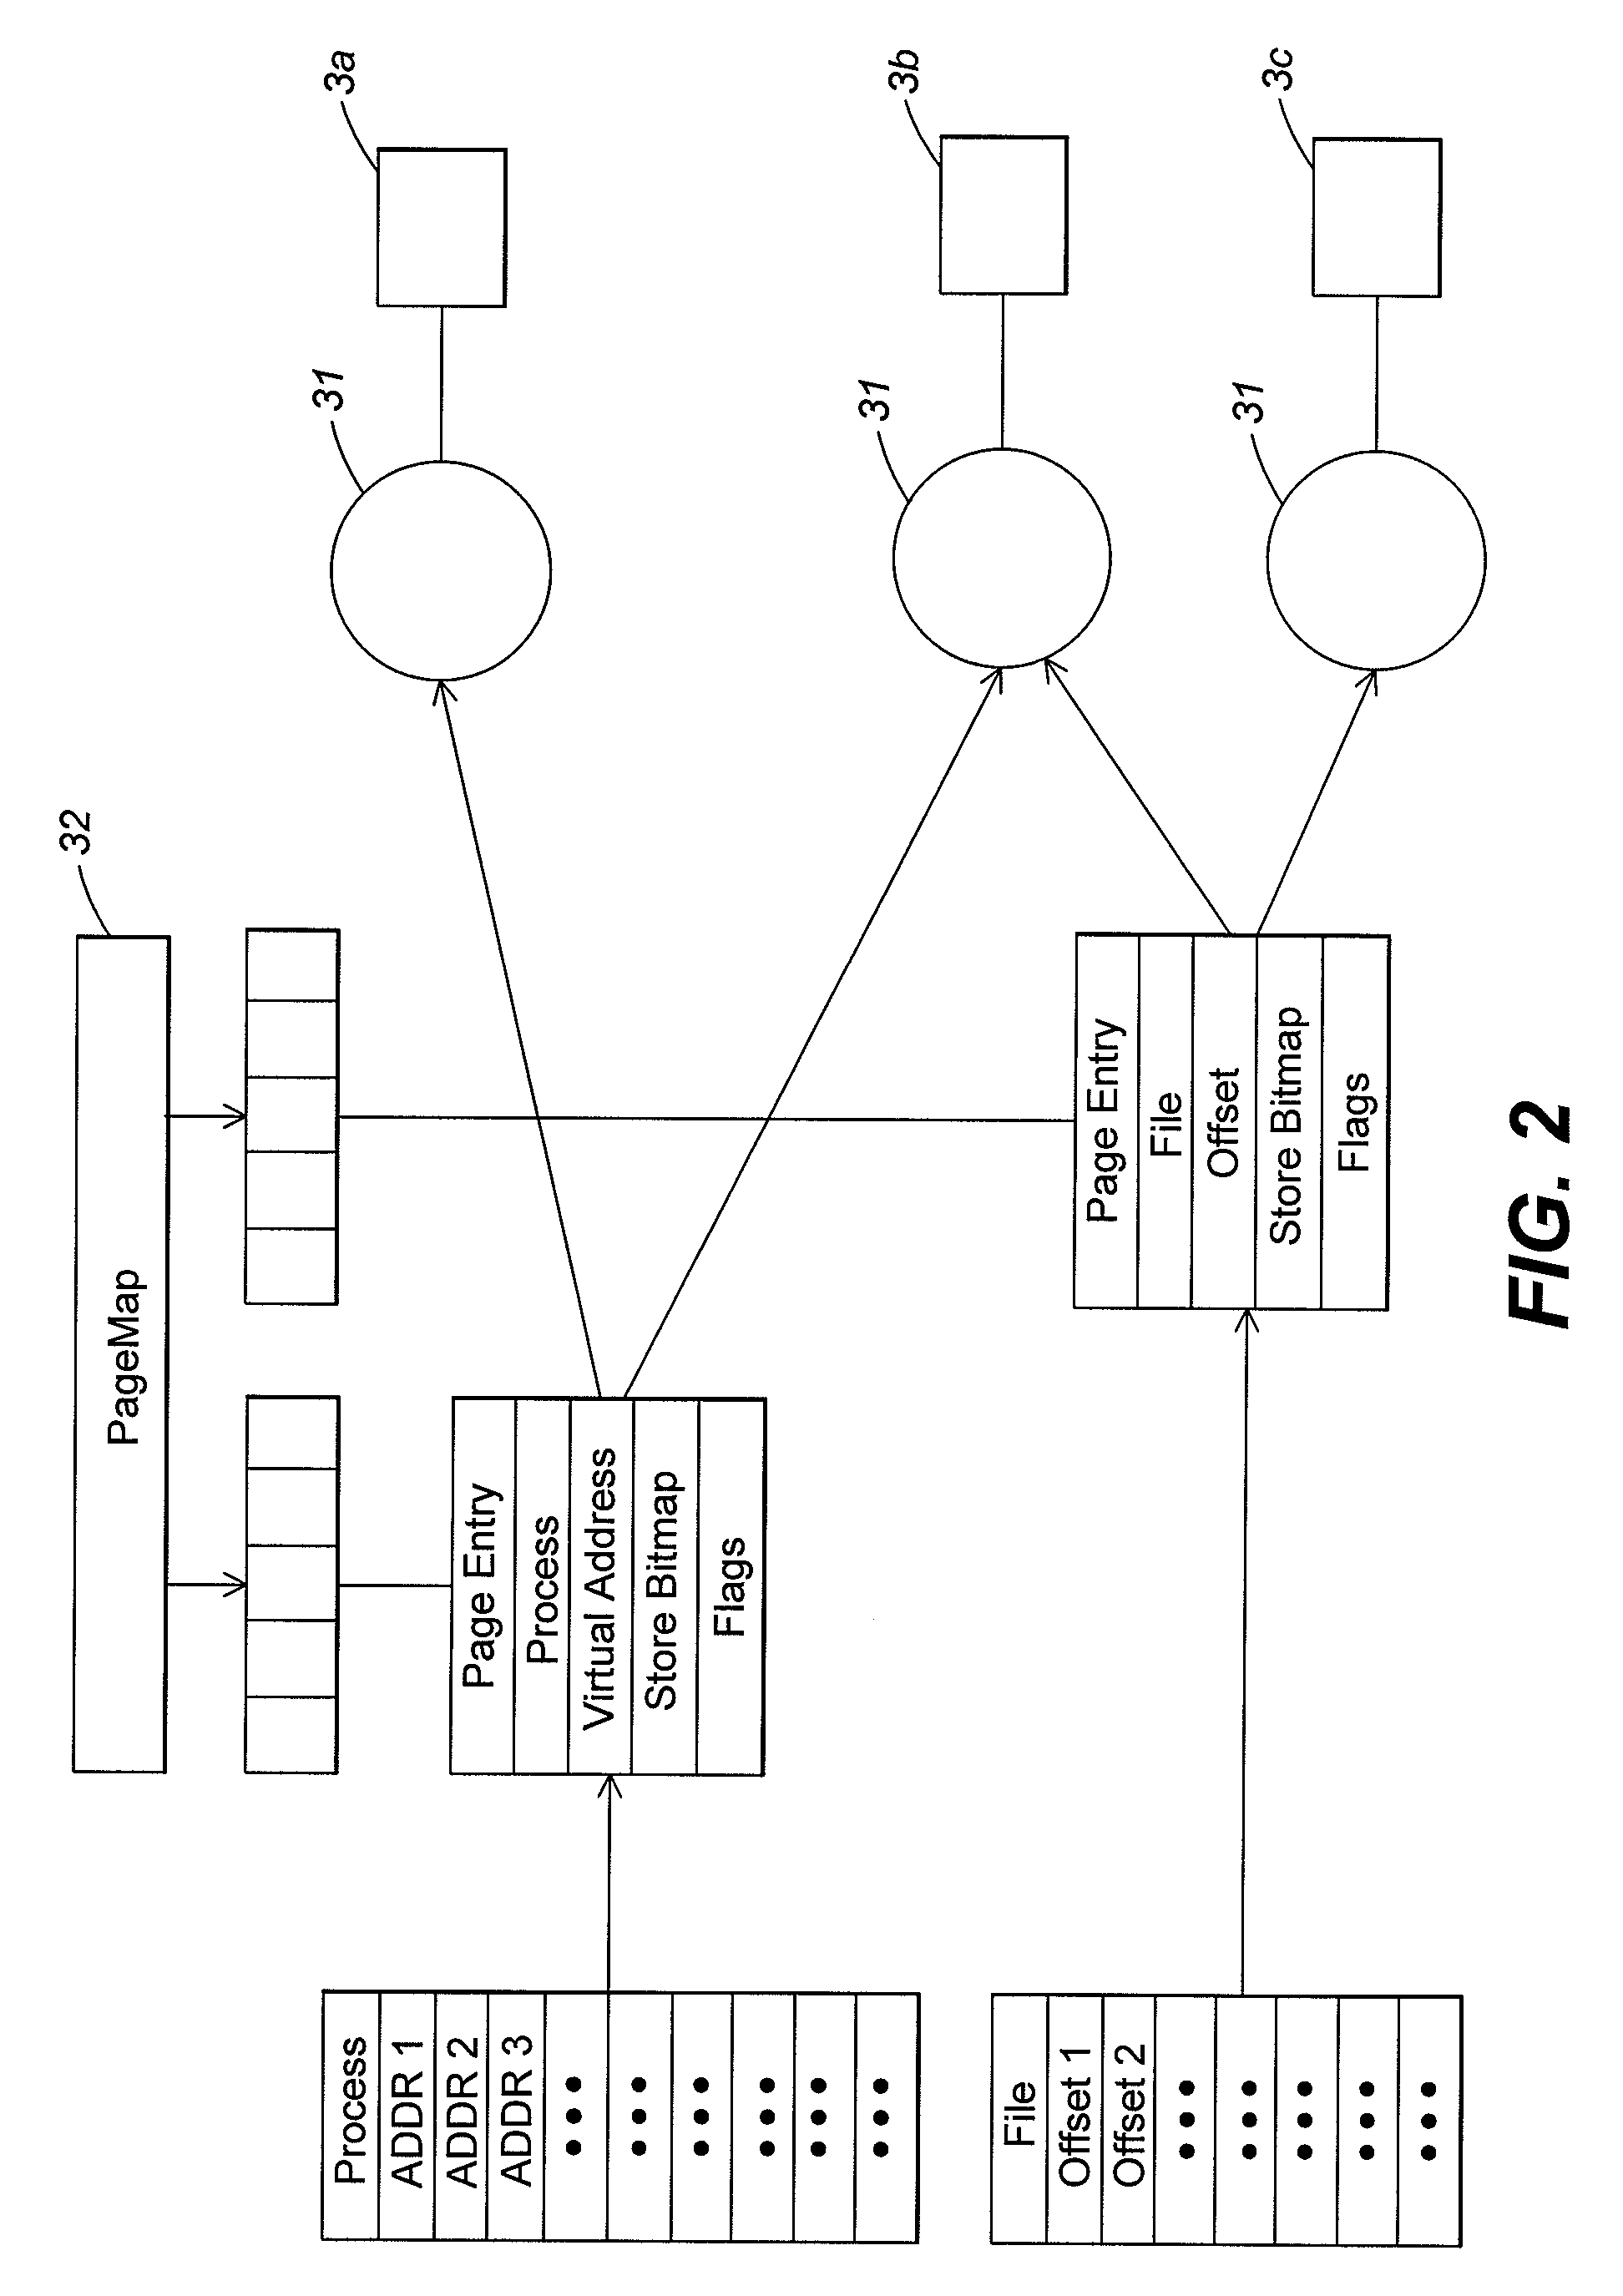 Management of external memory functioning as virtual cache